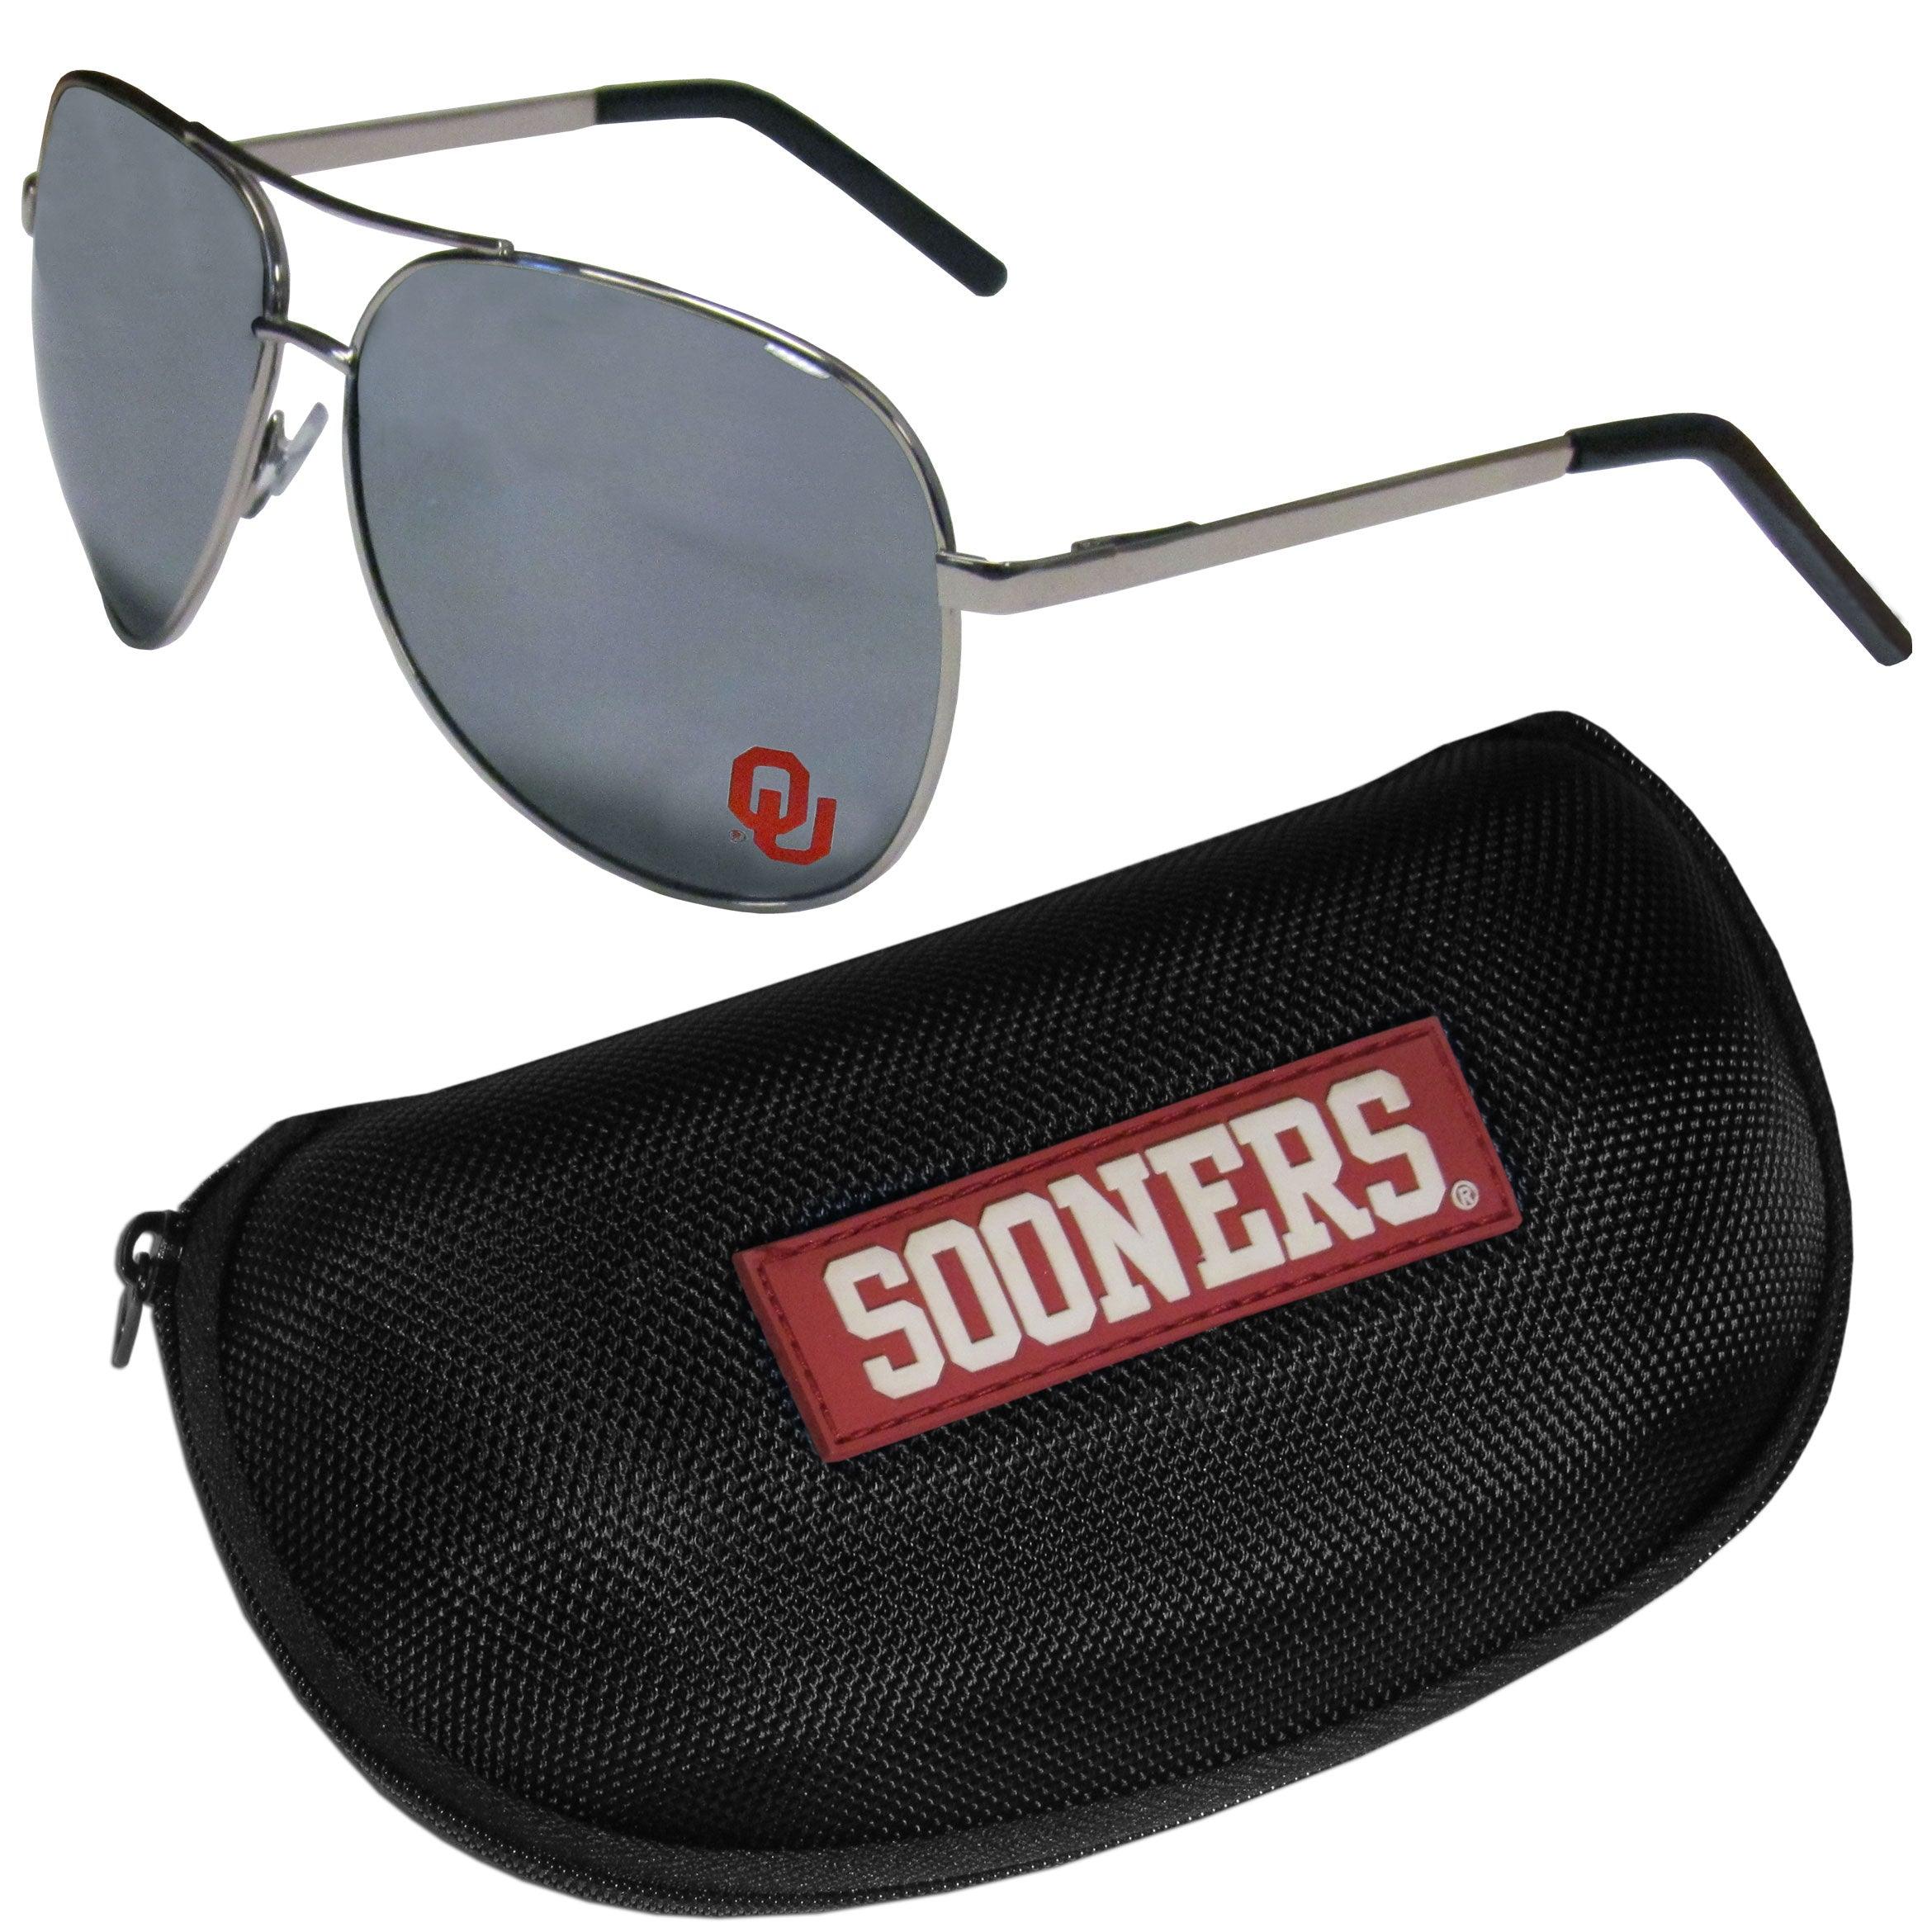 Oklahoma Sooners Aviator Sunglasses and Zippered Carrying Case - Flyclothing LLC